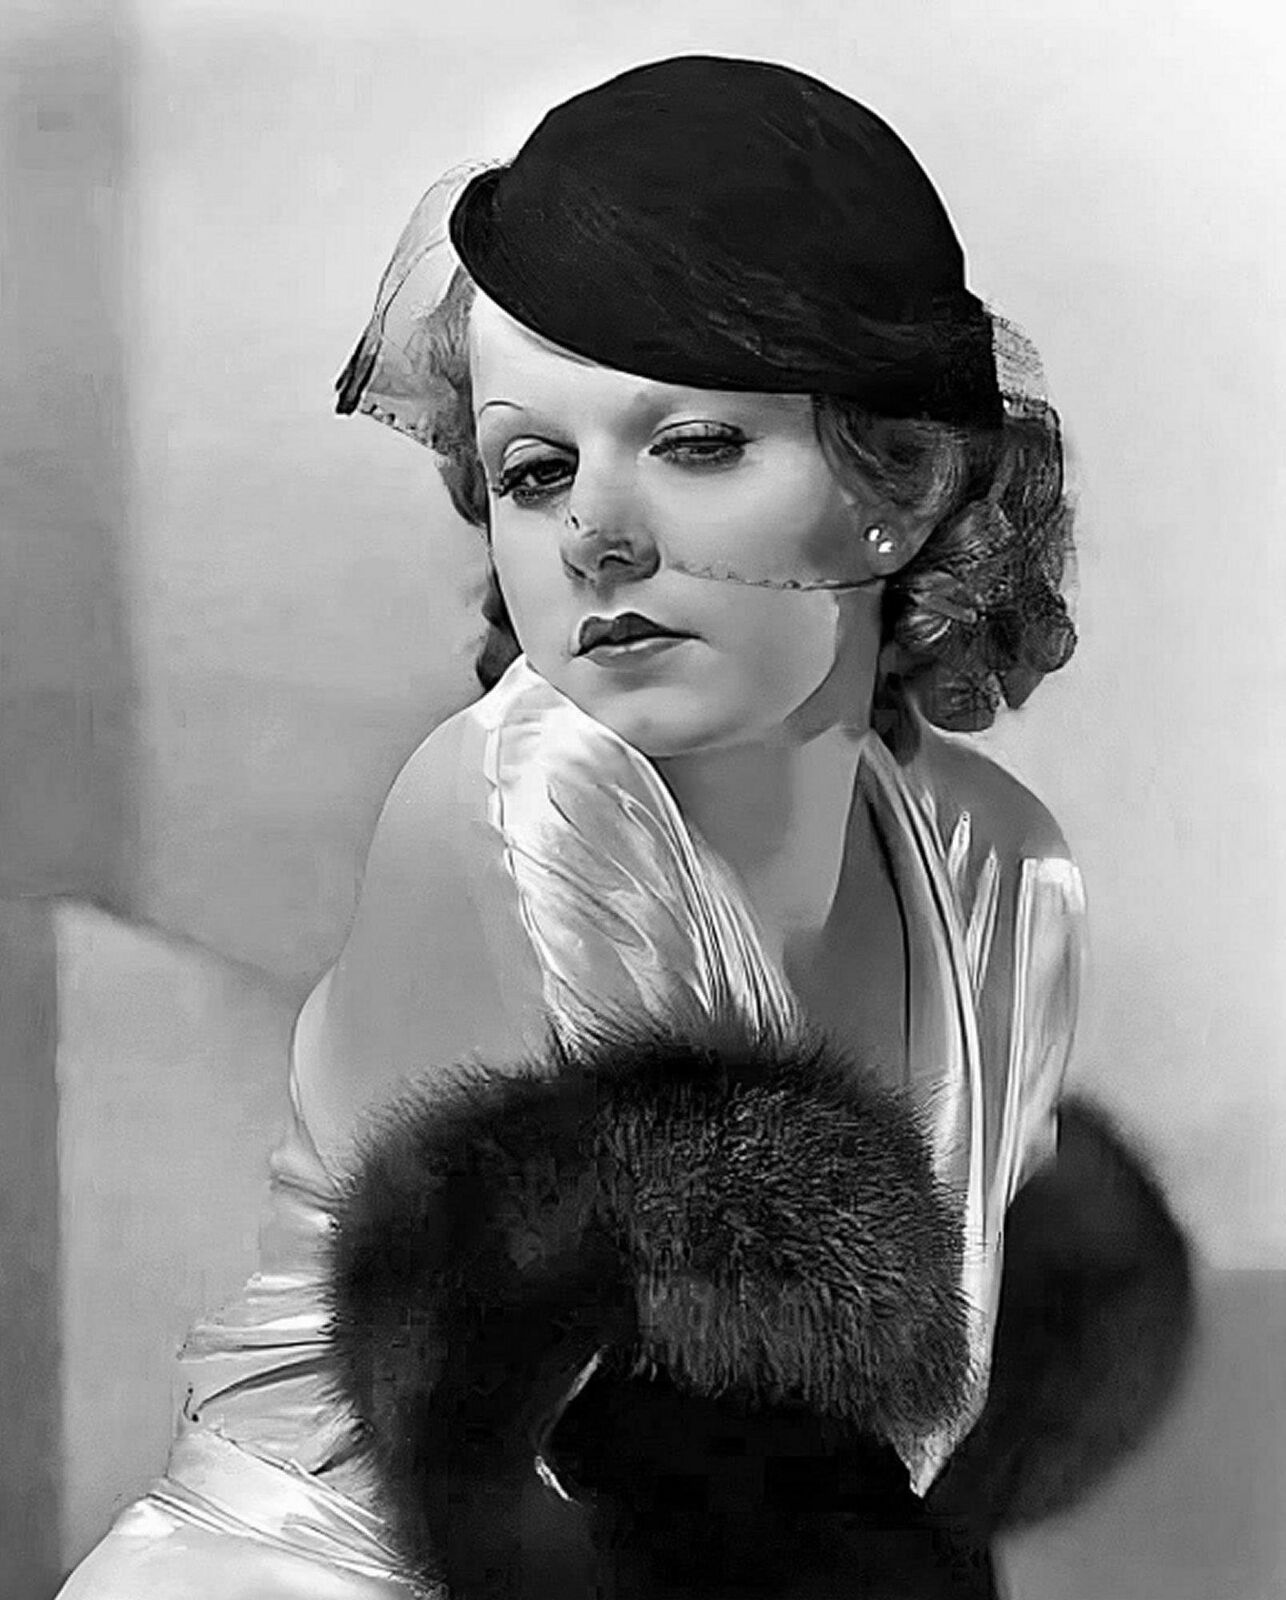 1932 JEAN HARLOW From RED-HEADED WOMAN Photo (228-C)